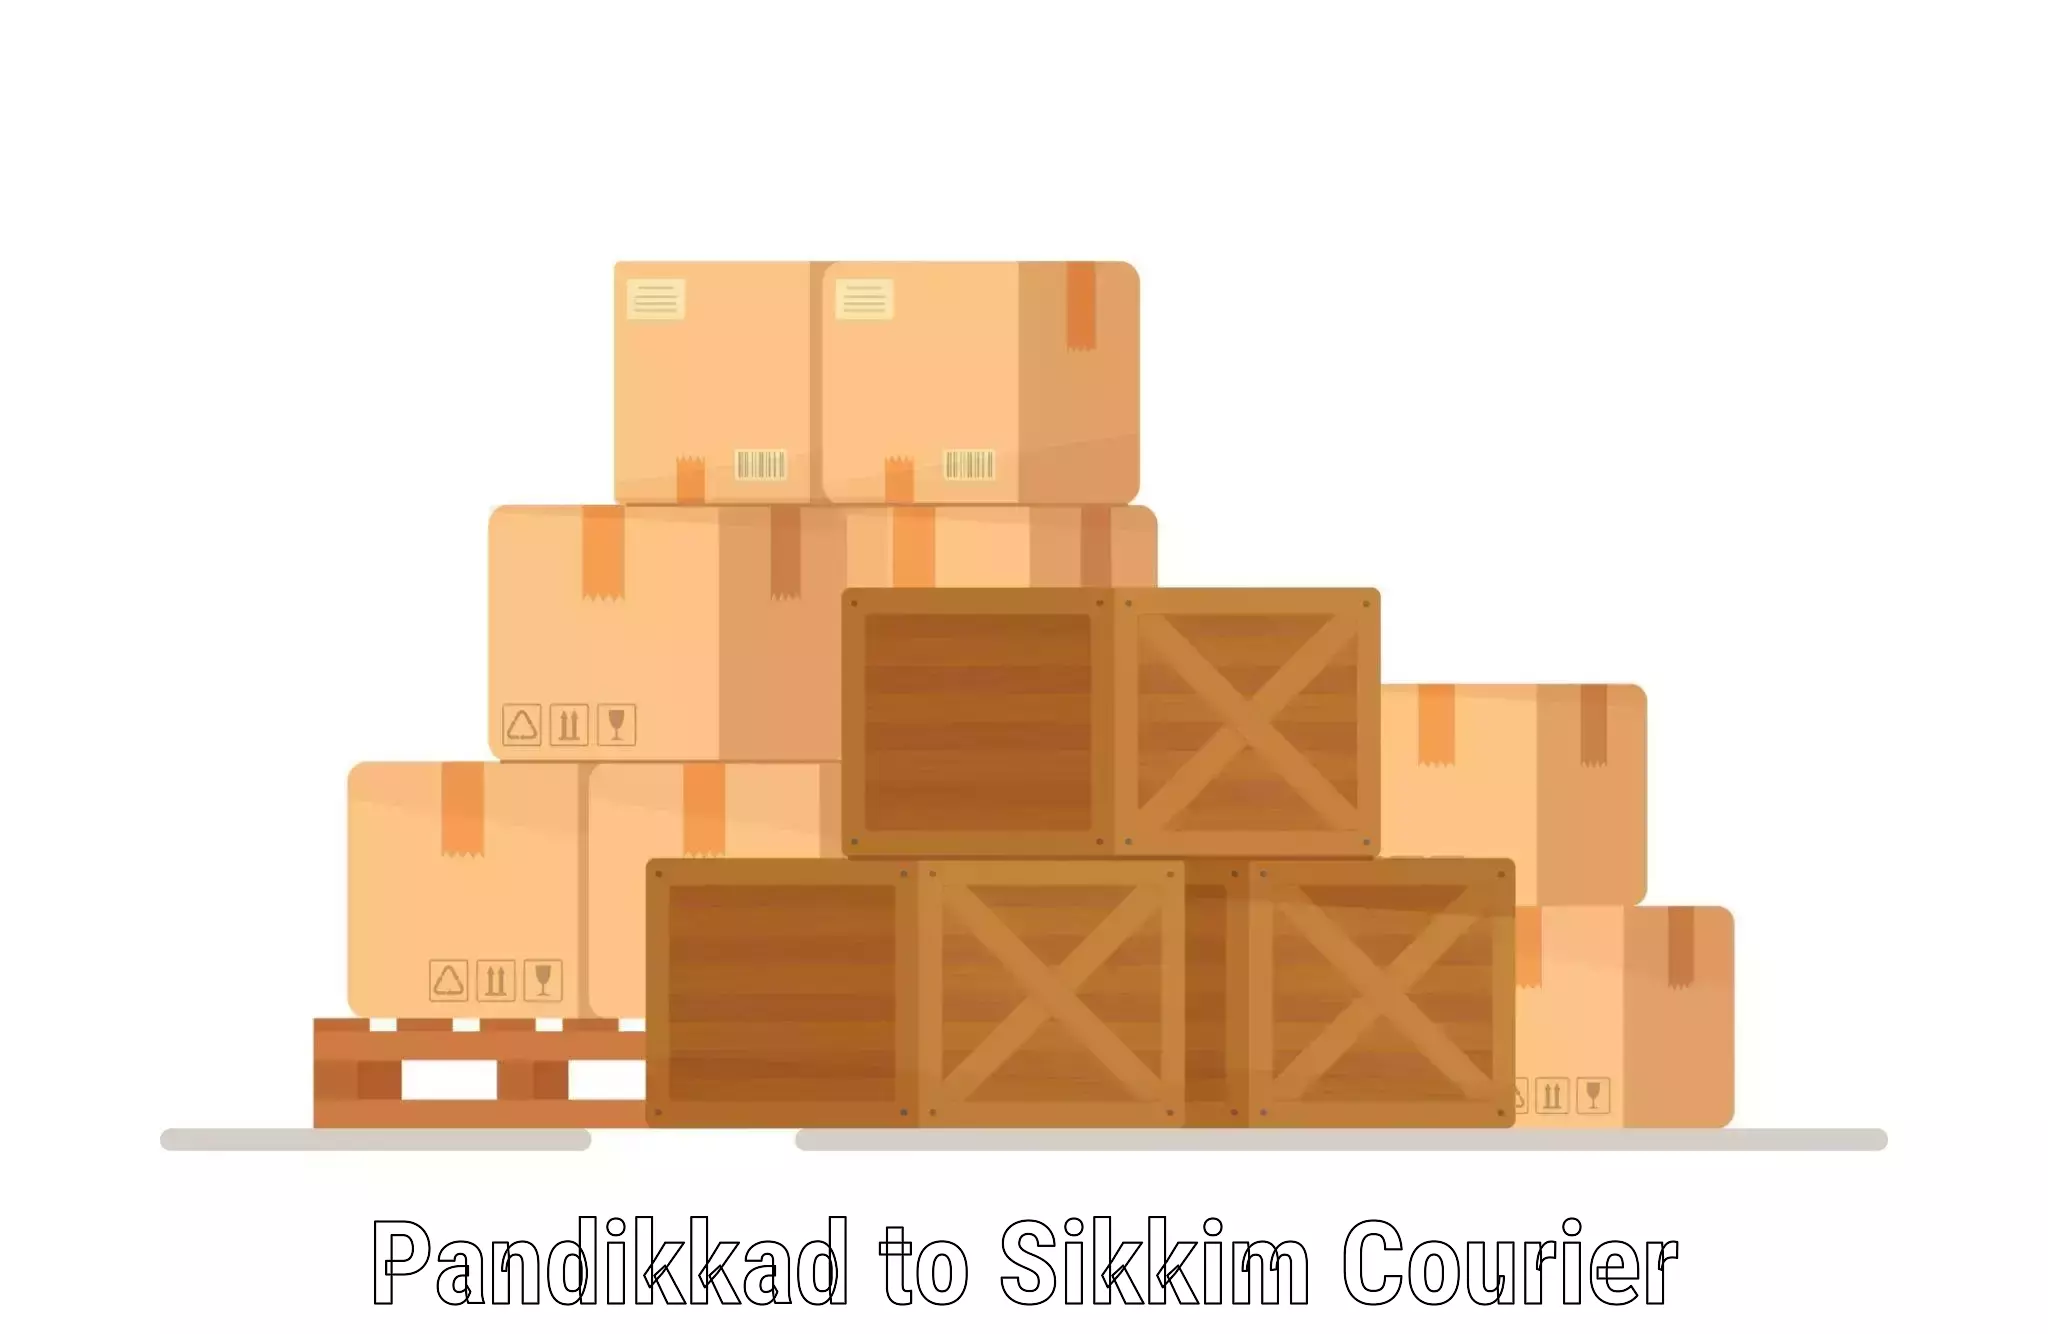 Heavy parcel delivery Pandikkad to Sikkim